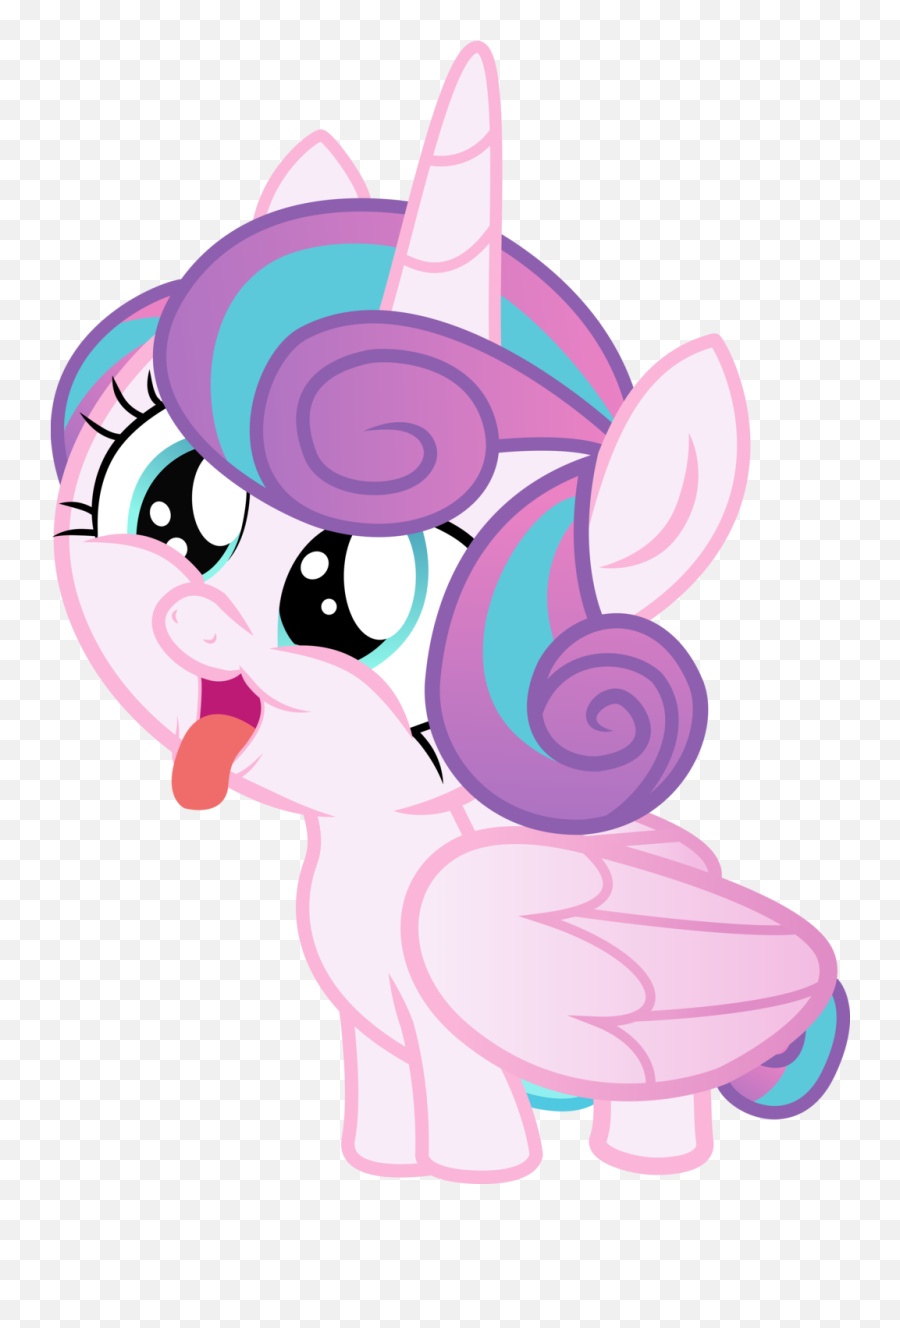 Is Flurry Heart An Unnecessary Character - Page 2 Mlpfim Flurry Heart Emoji,Find The Emoji Conflict Diamond